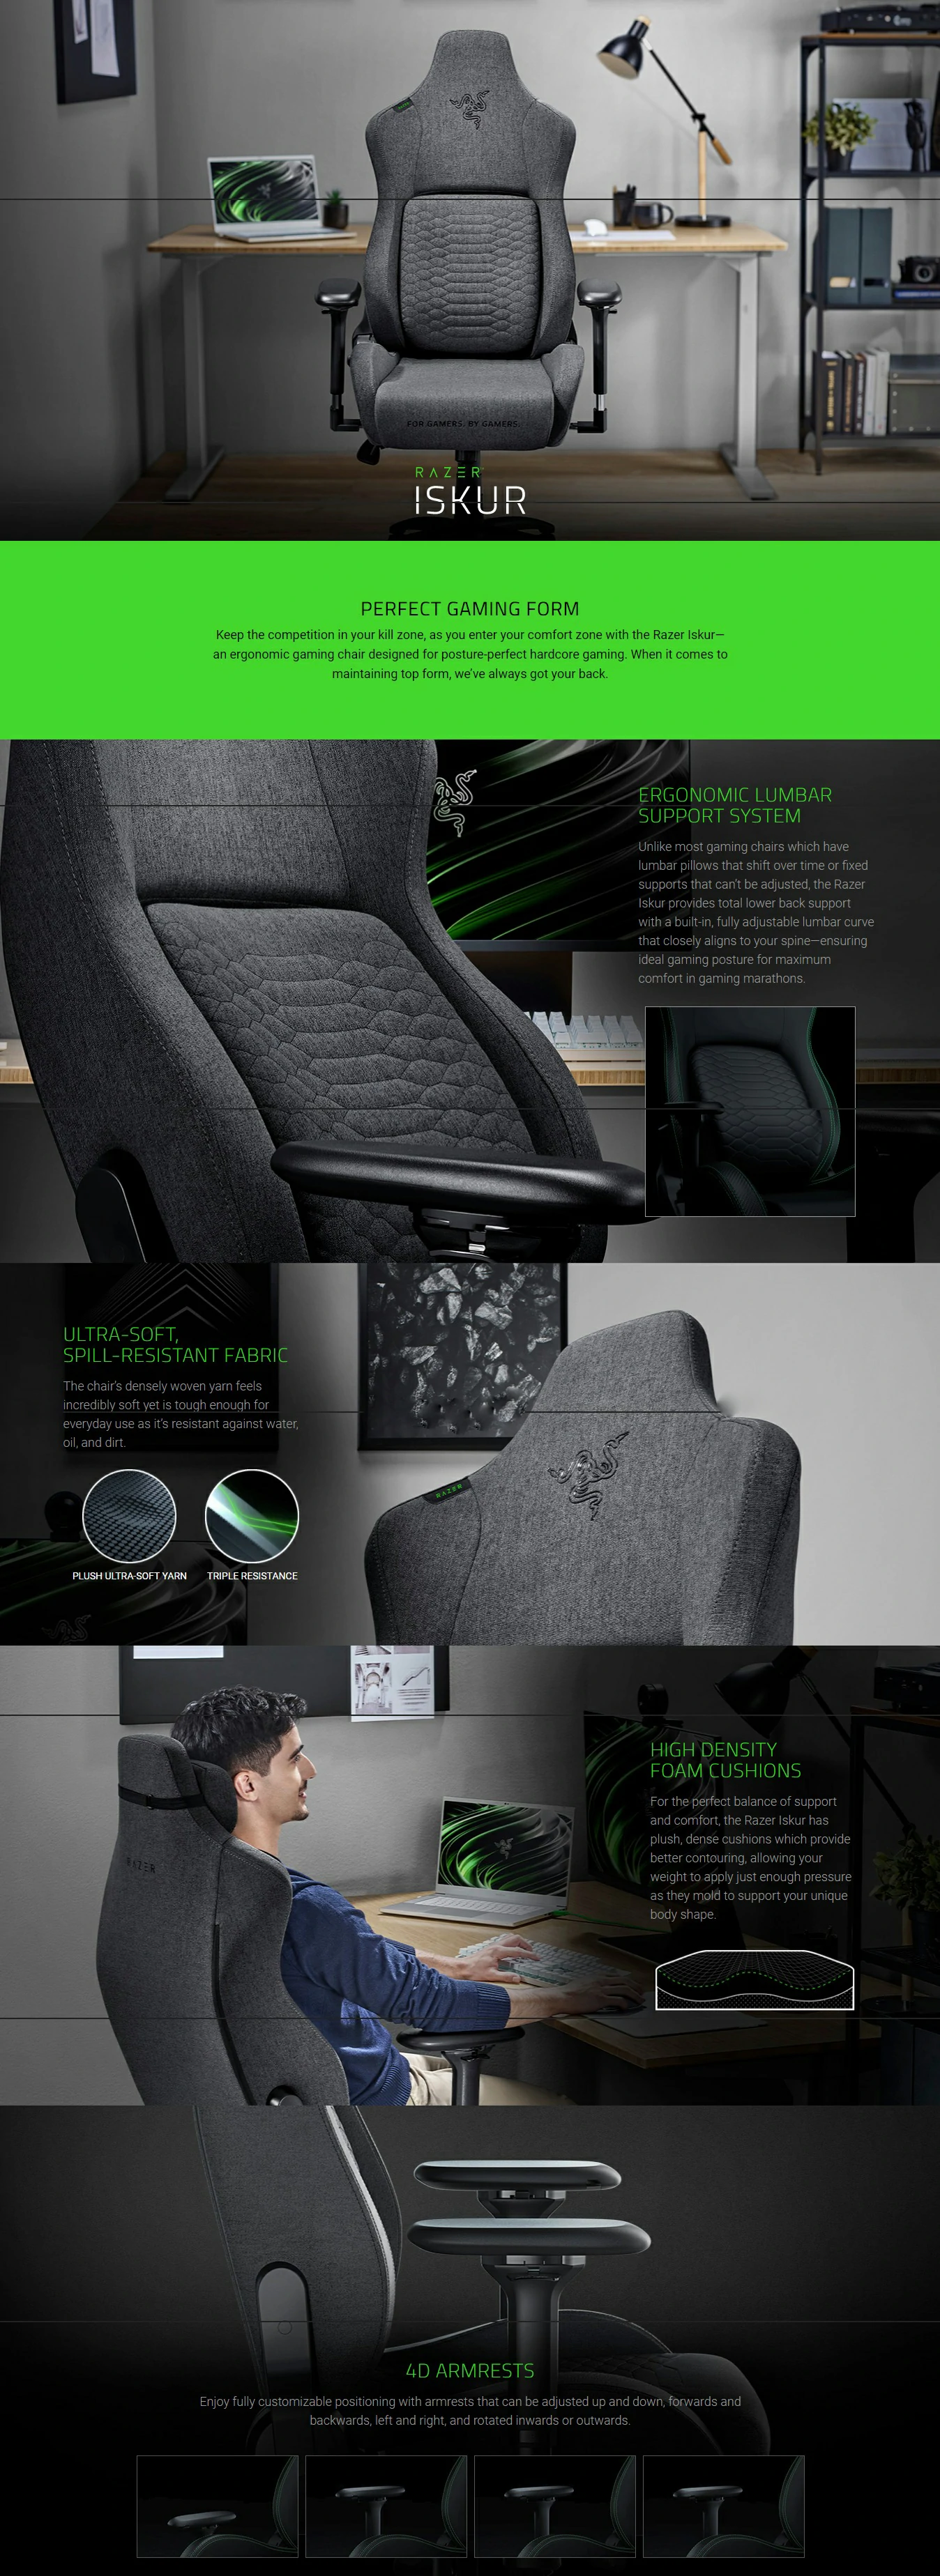 Overview - Razer Iskur Gaming Chair with Built-in Lumbar Support - Dark Gray